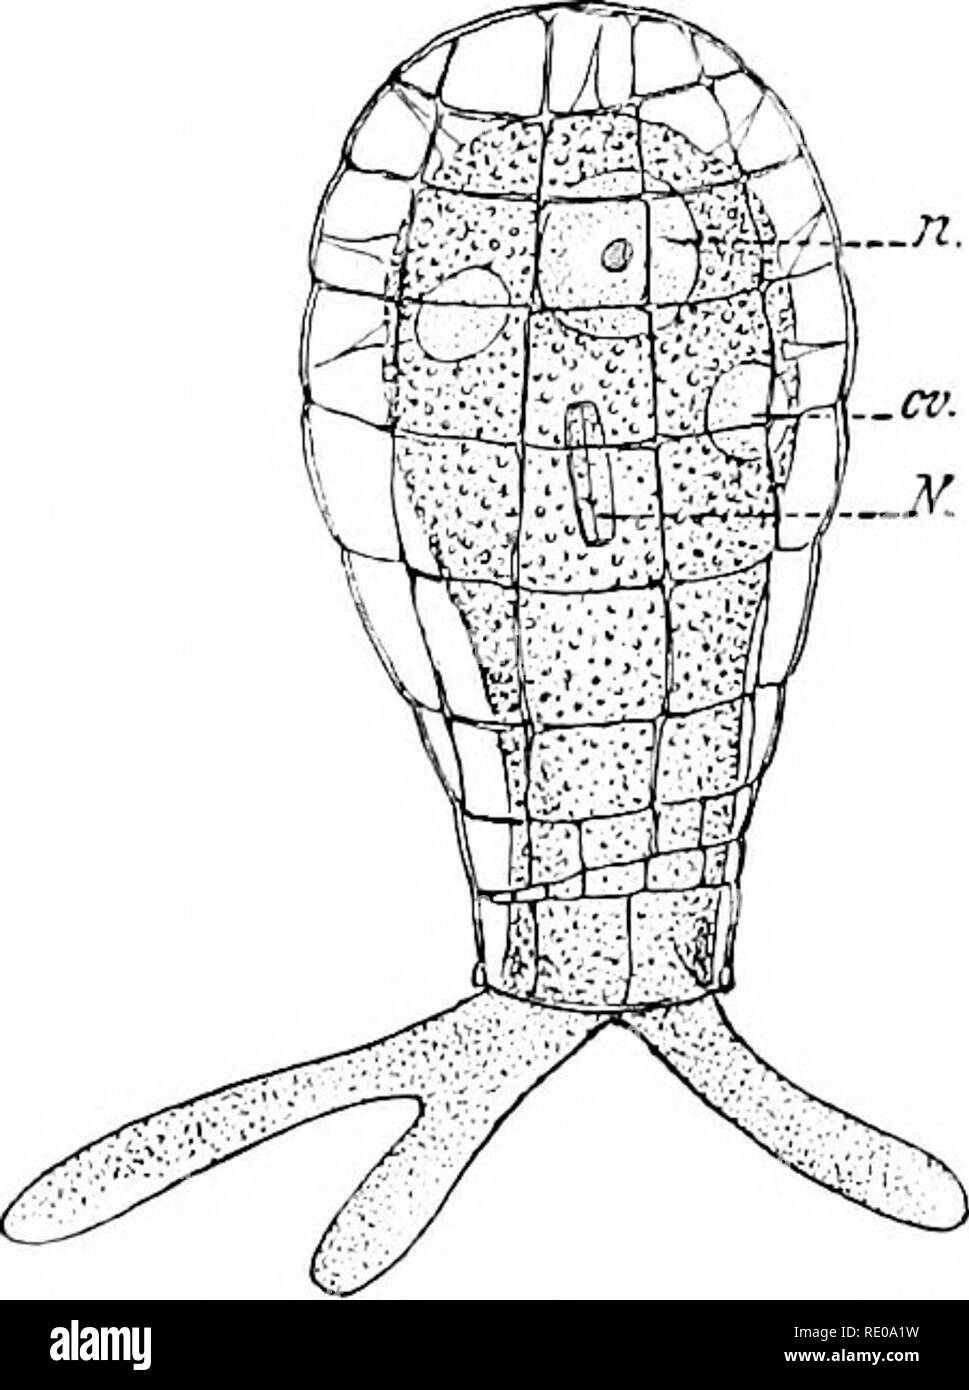 . A manual of zoology. Zoology. lye PROTOZOA. couTiM (fig. 133); Haliommid^ with latticed spheres (fig. 85;; Discid.e, disc like. Sub Order II. ACANTHARIA. Capsular membrane perforated every- where by pore canals; twenty spines of acanthin which radiate from the centre in an extremely regular manner, form the skeleton, as in Arxintho- metra (flg. 125), or the spines are bound together by a latticed sphere formed of twenty separate plates, as in Ar:antliofihractii. Sub Order III. MONOPYLEA or NASSELLARIA. The pores of the central capsule occupy a pore field at one end. Best known are the Cyrtid Stock Photo